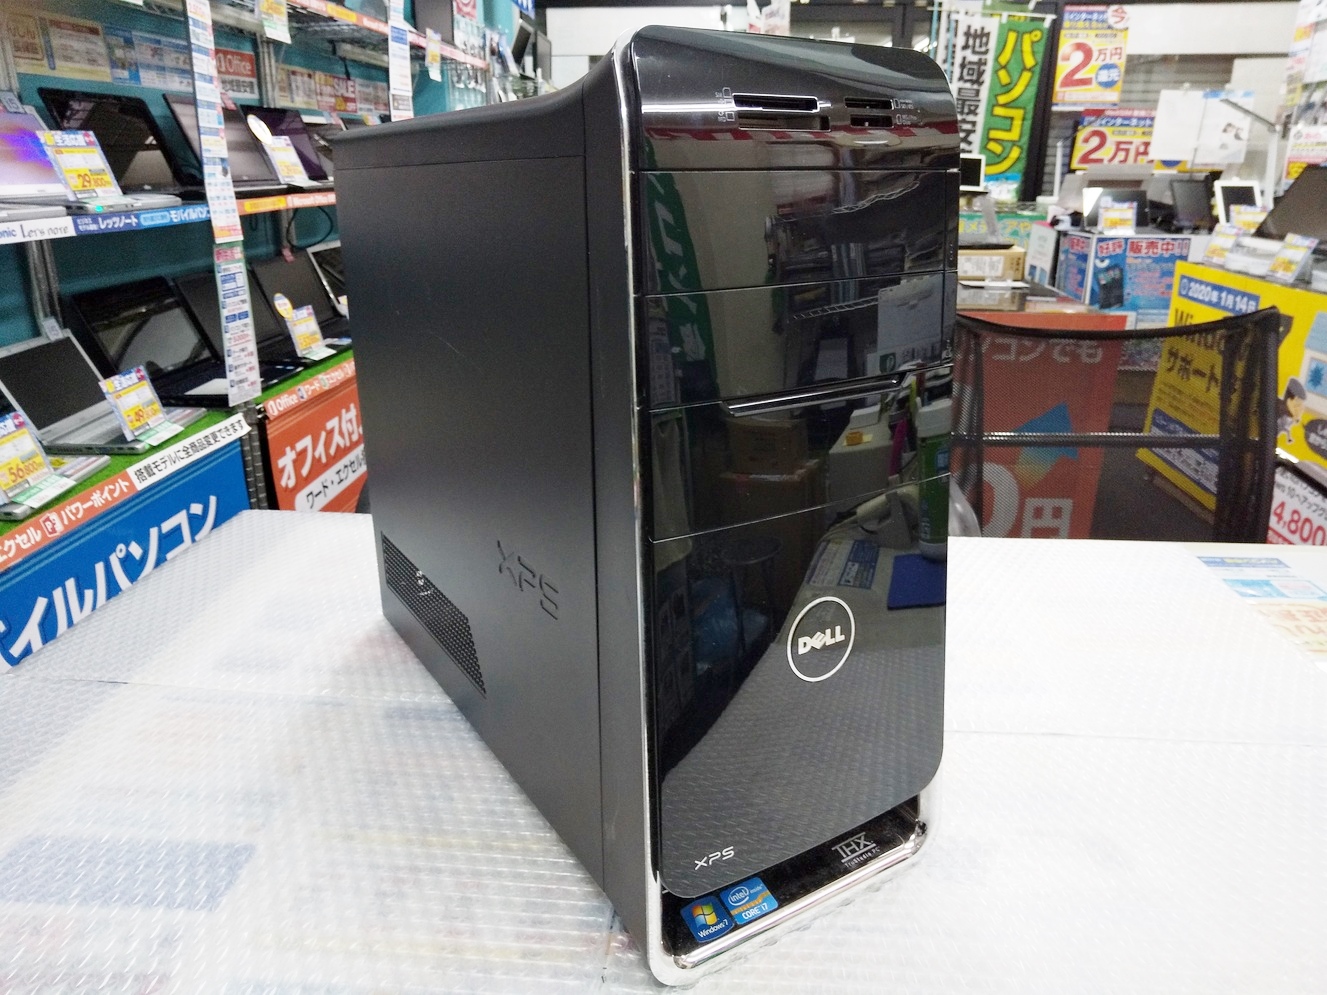 DELL XPS 8300 (Core i7-2600 3.40GHz/16GB/1TB) 中古パソコンを激安